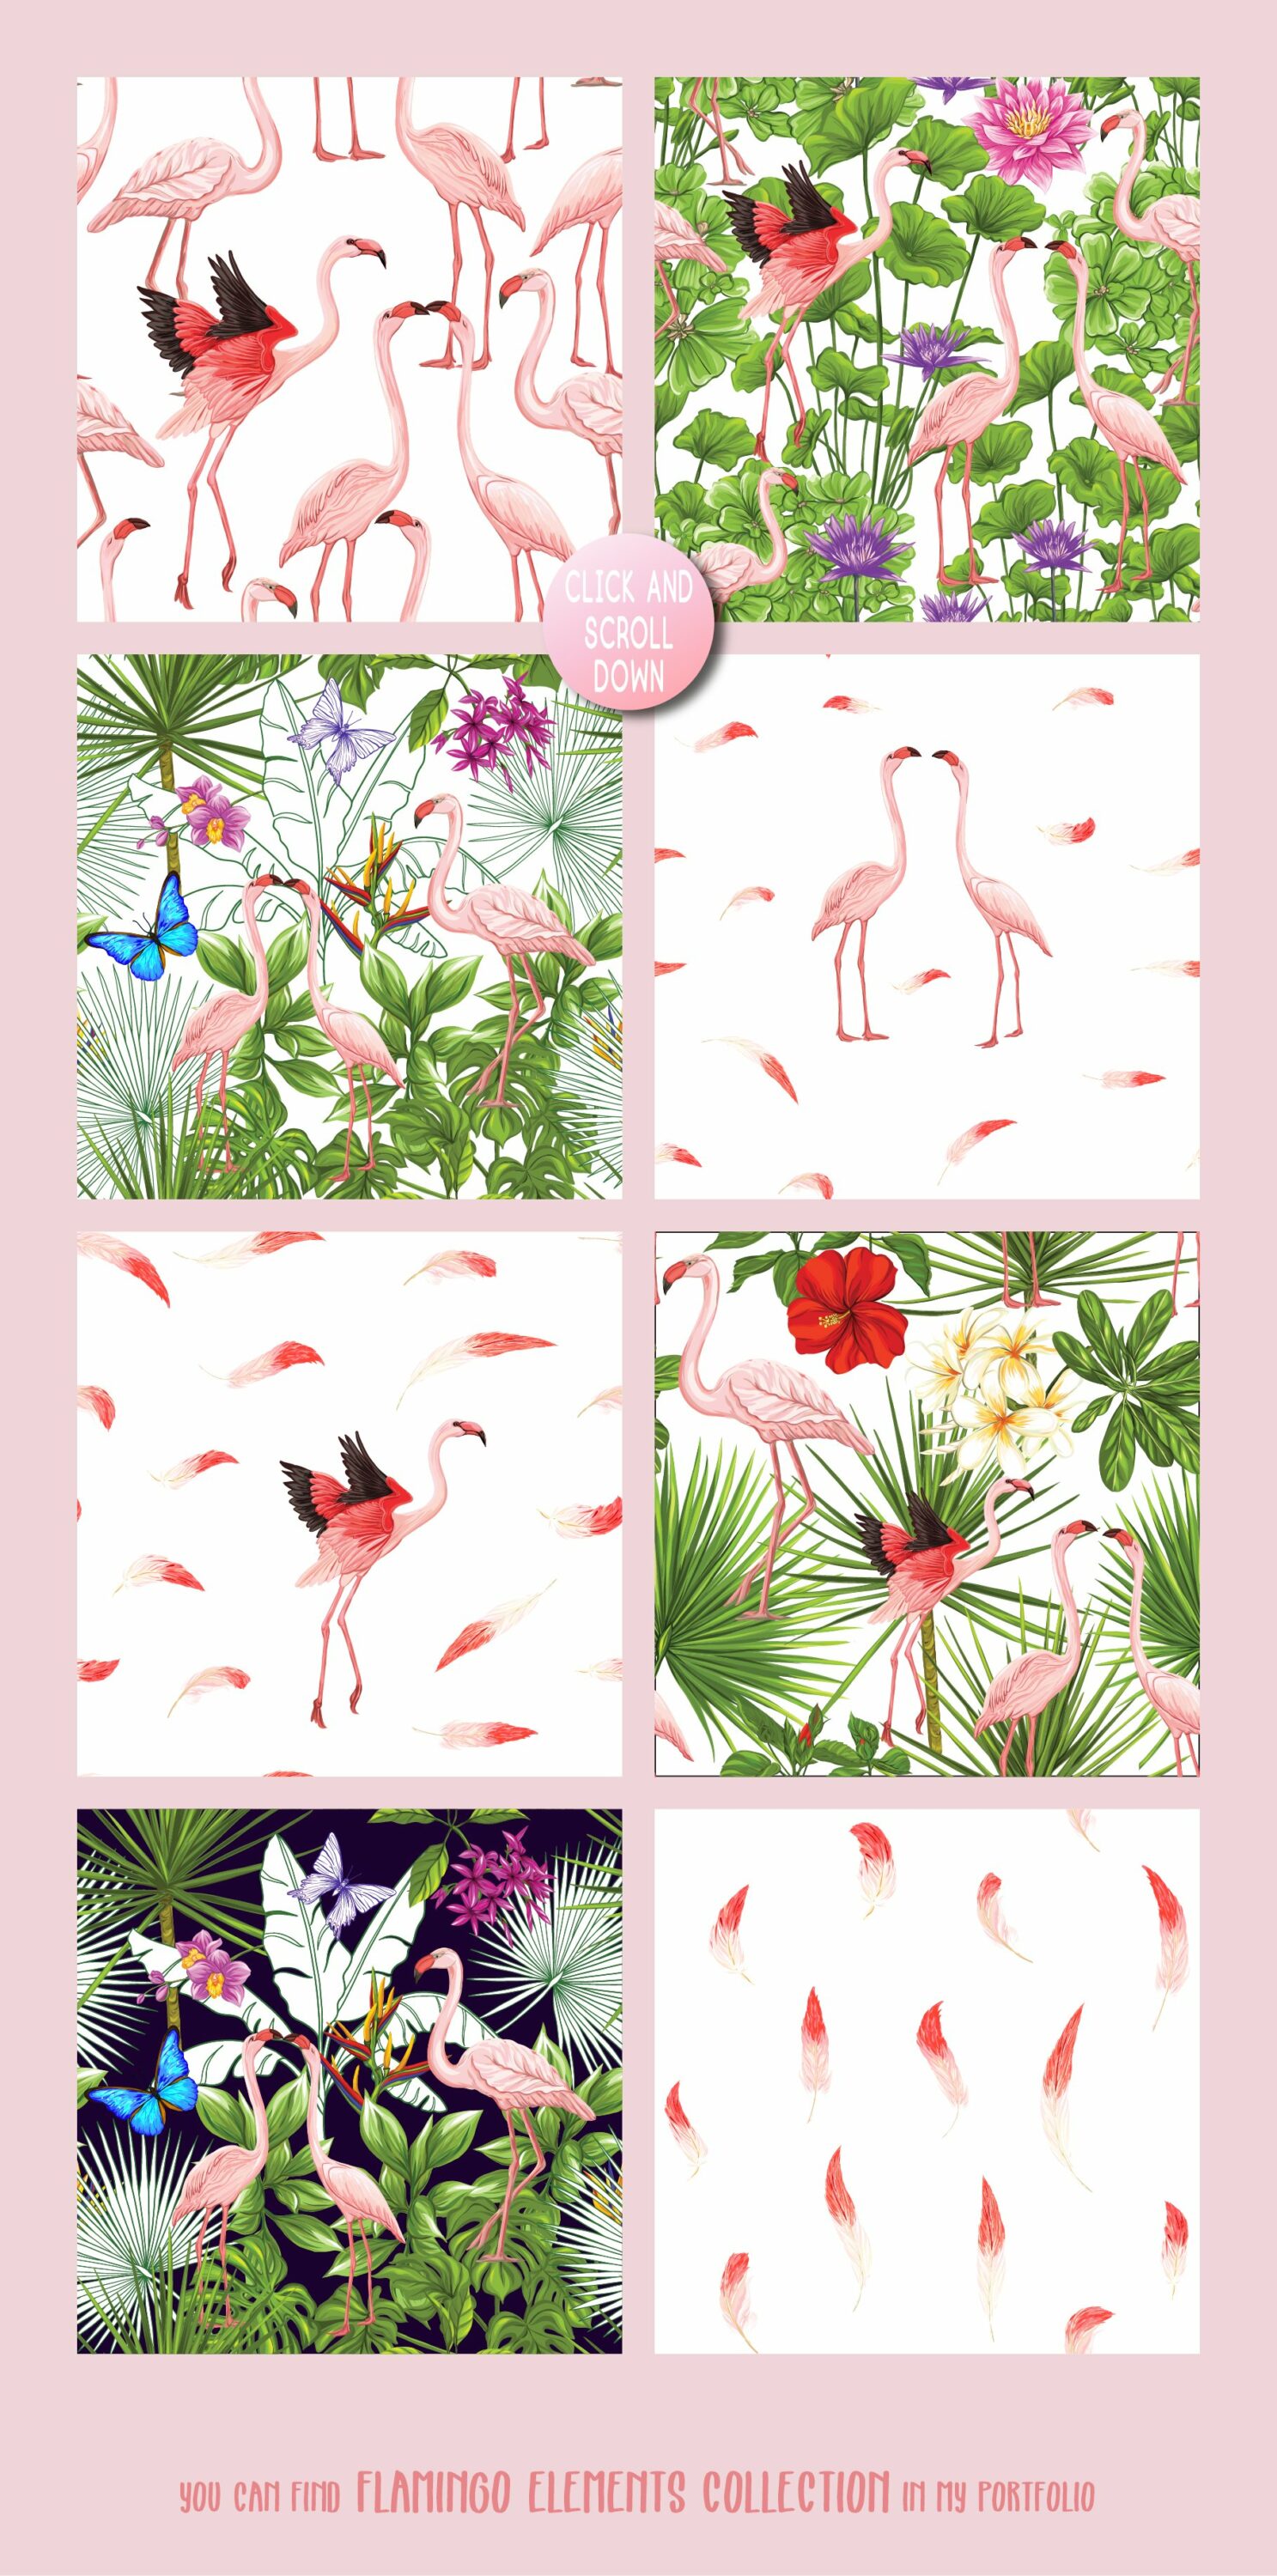 This is a nice flamingo set for your notebook.